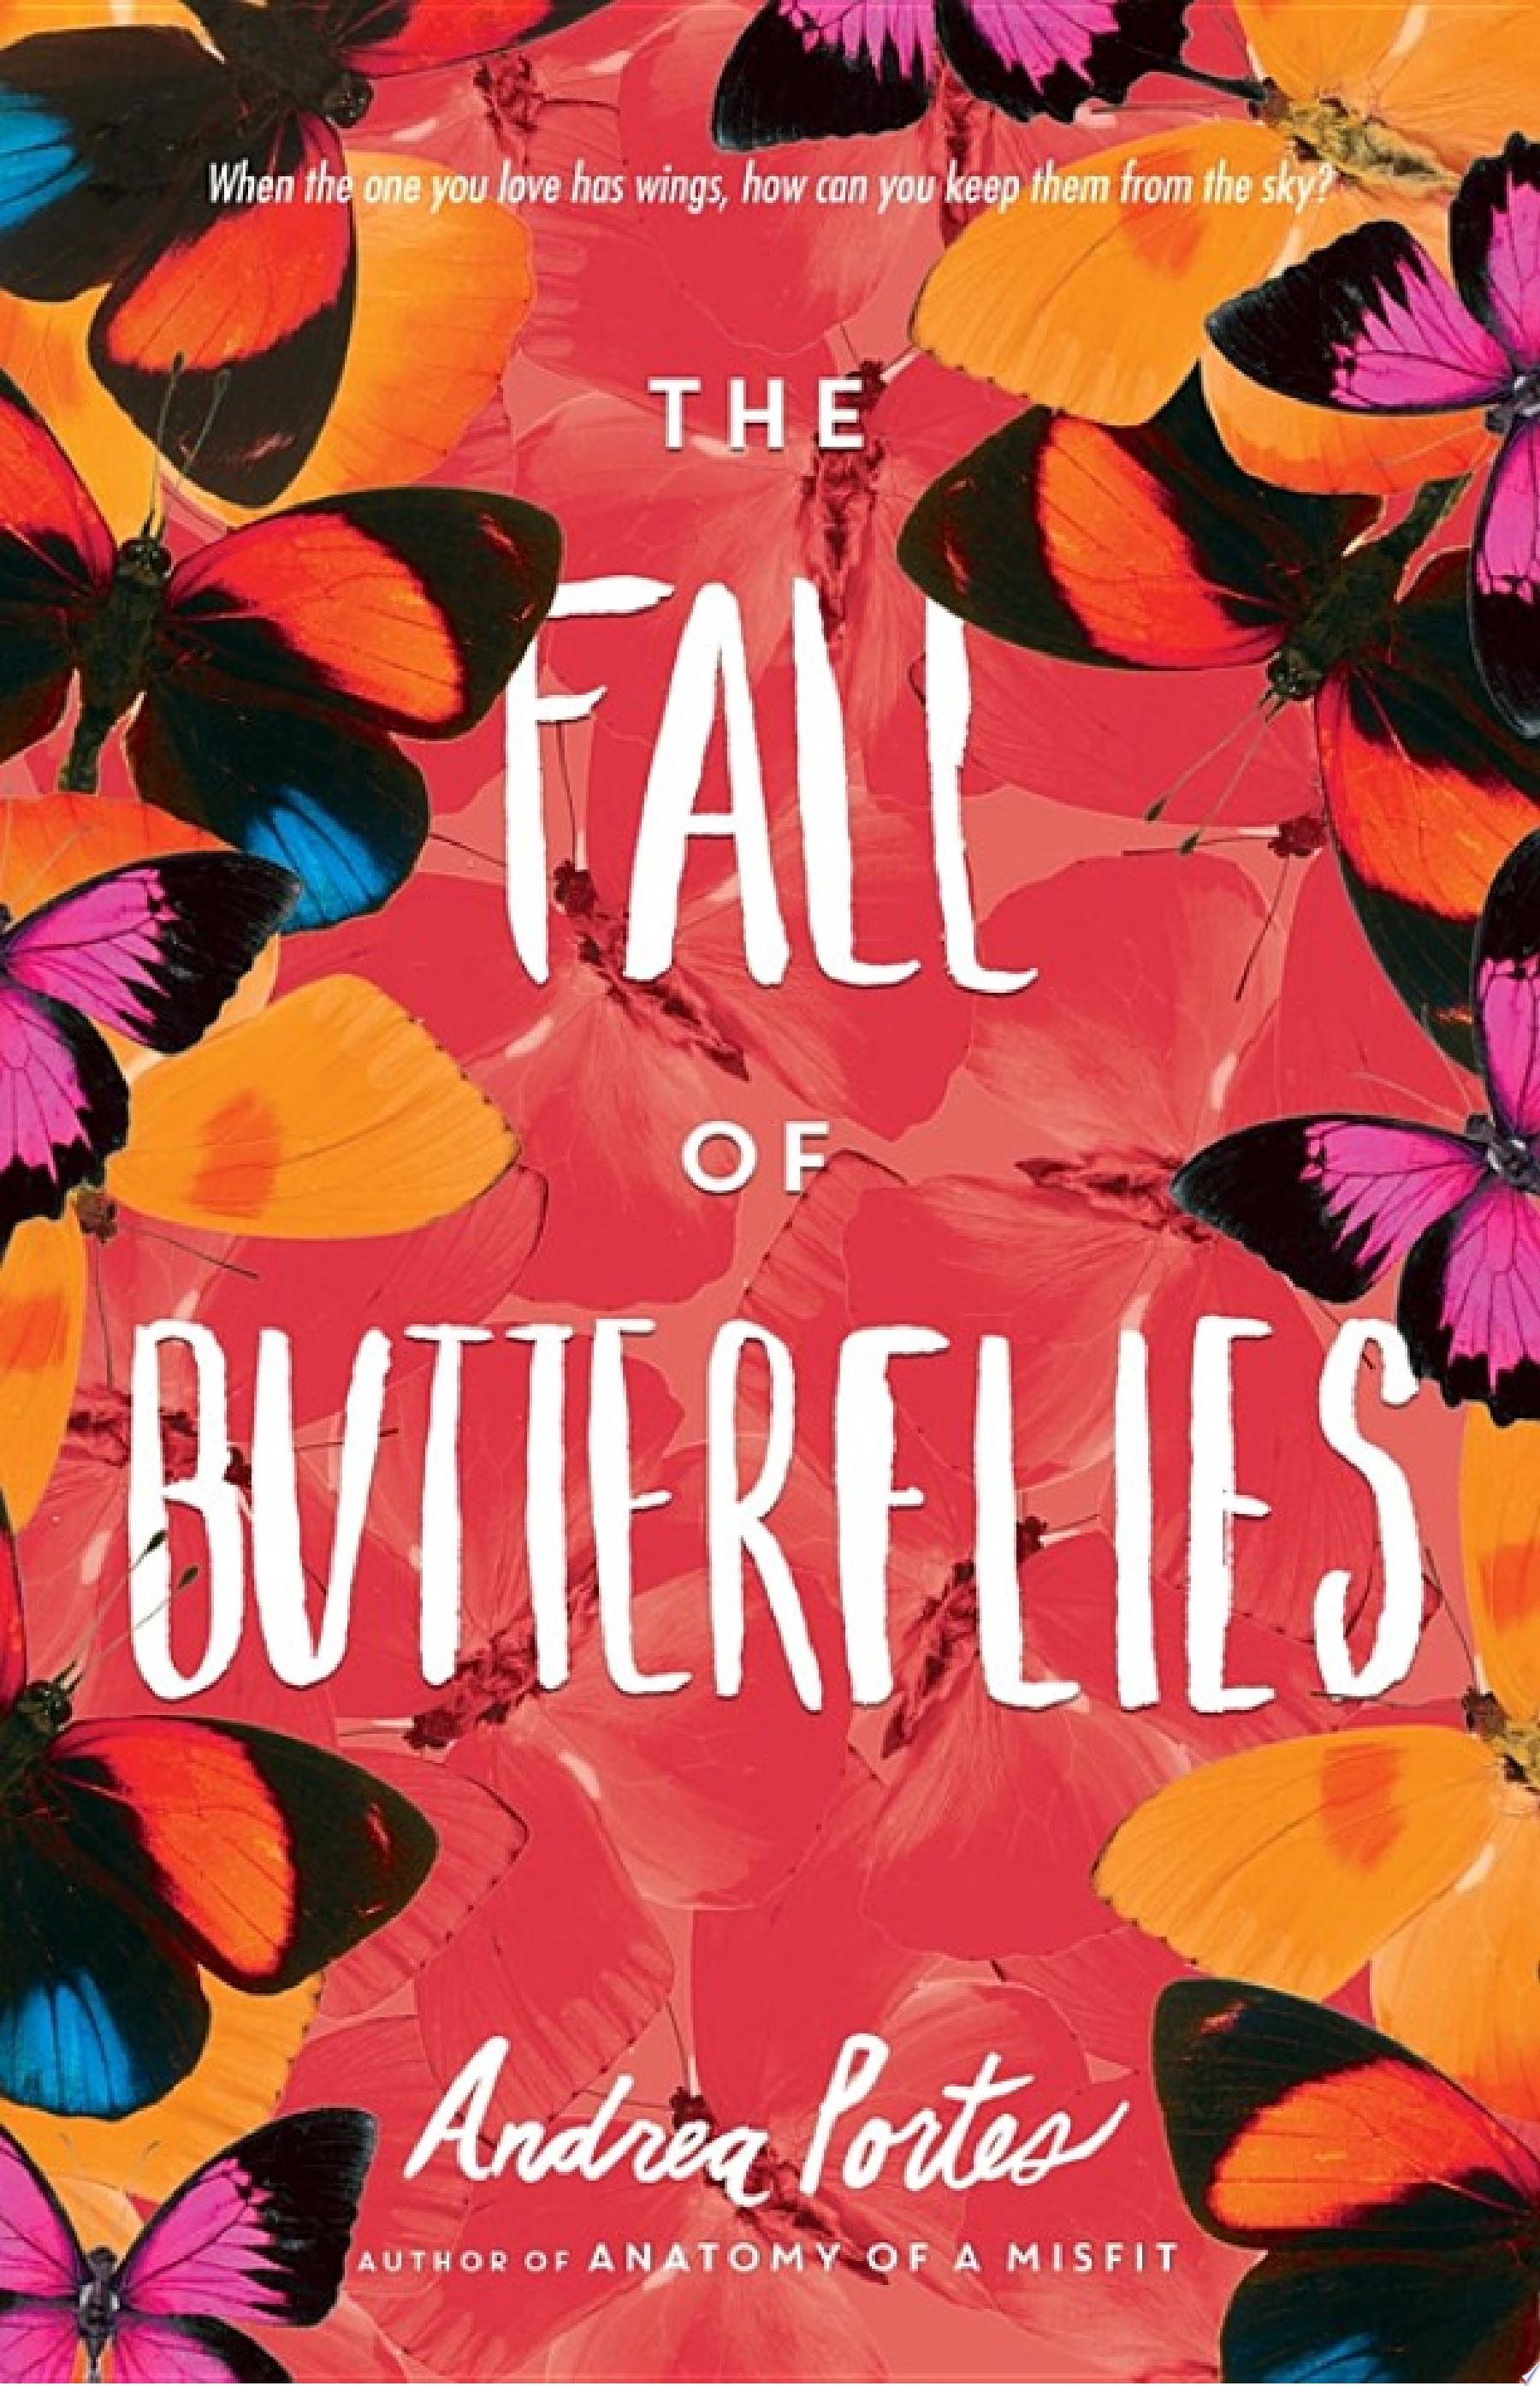 Image for "The Fall of Butterflies"